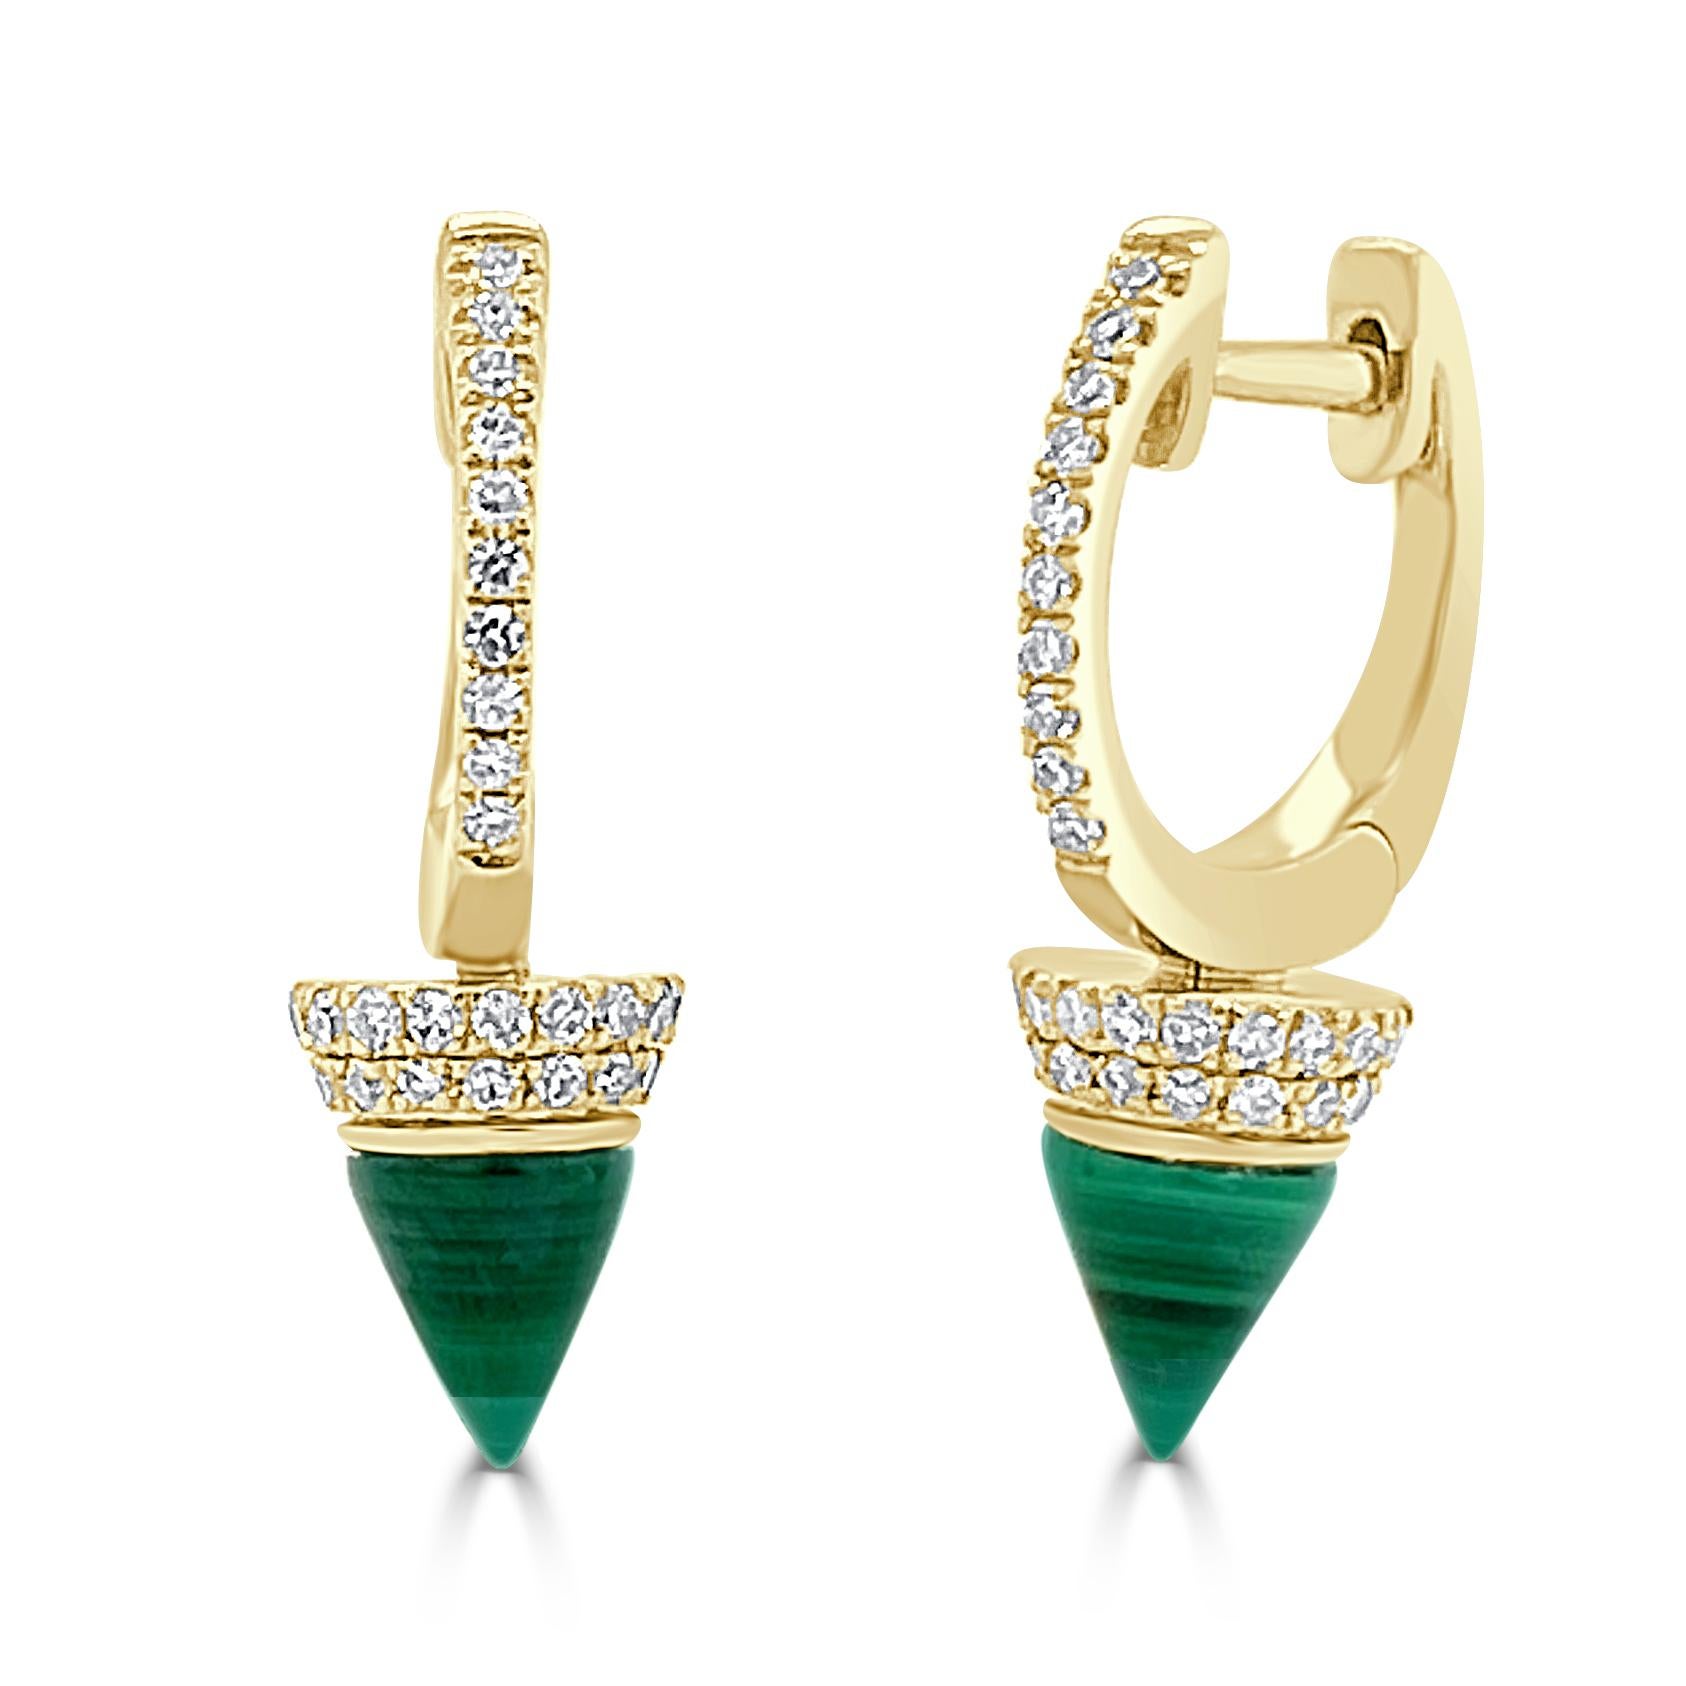 14k Gold Malachite & Diamond Spike Drop Huggy Earrings

Earring Diameter: 3/4 inches
Diamond Weight: 0.29 ct.
Diamond Count: 86
Gemstone Weight: 4.0 ct.
Gold Weight: 2.6 grams (approx.)
This piece is perfect for everyday wear and makes the perfect